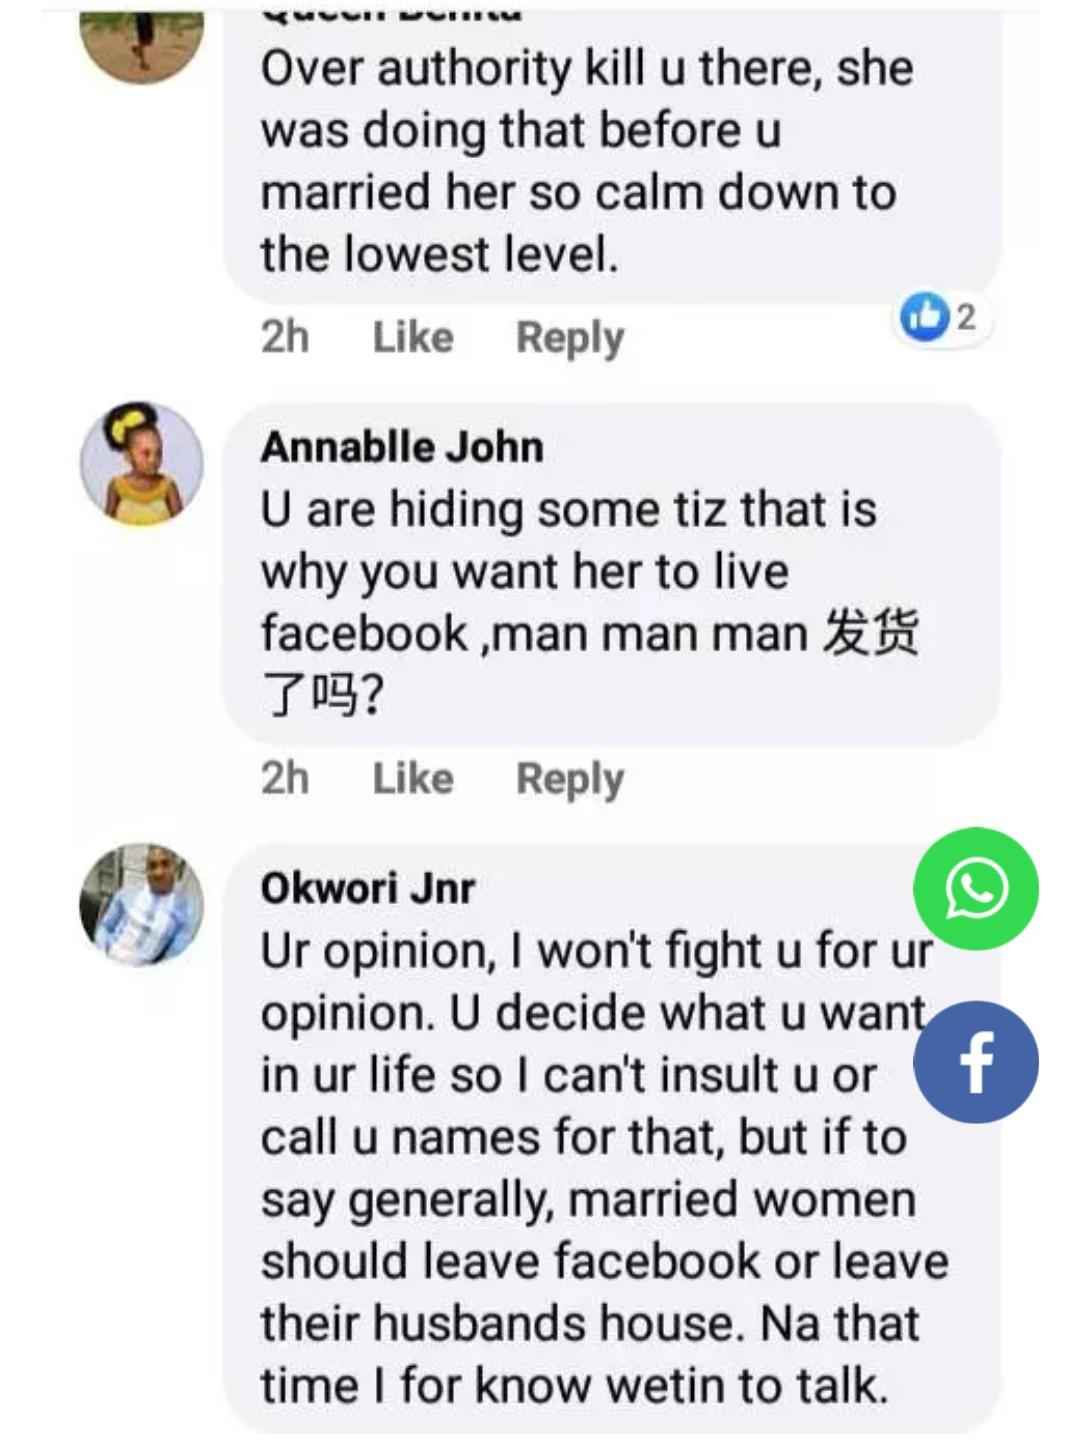 Nigerian Man, Philemon Audu Orders Wife To Quit Facebook Or Leave His House; See Reactions  %Post Title